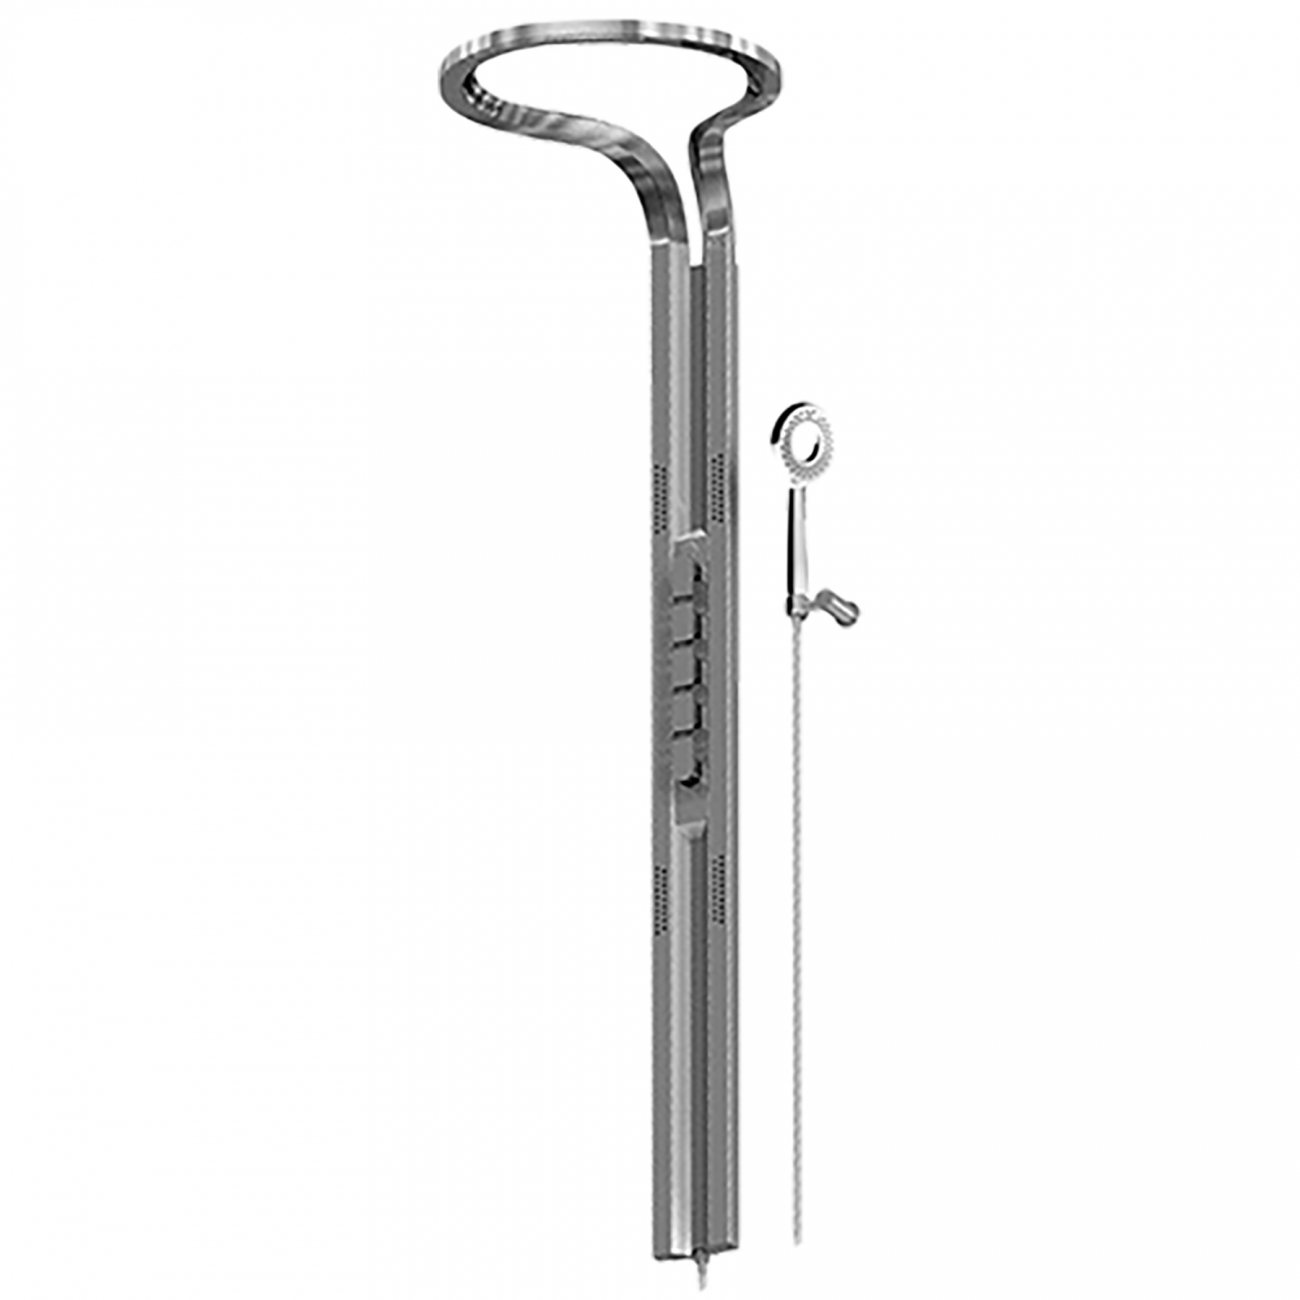 Graff Ametis wall mounted thermostatic shower column